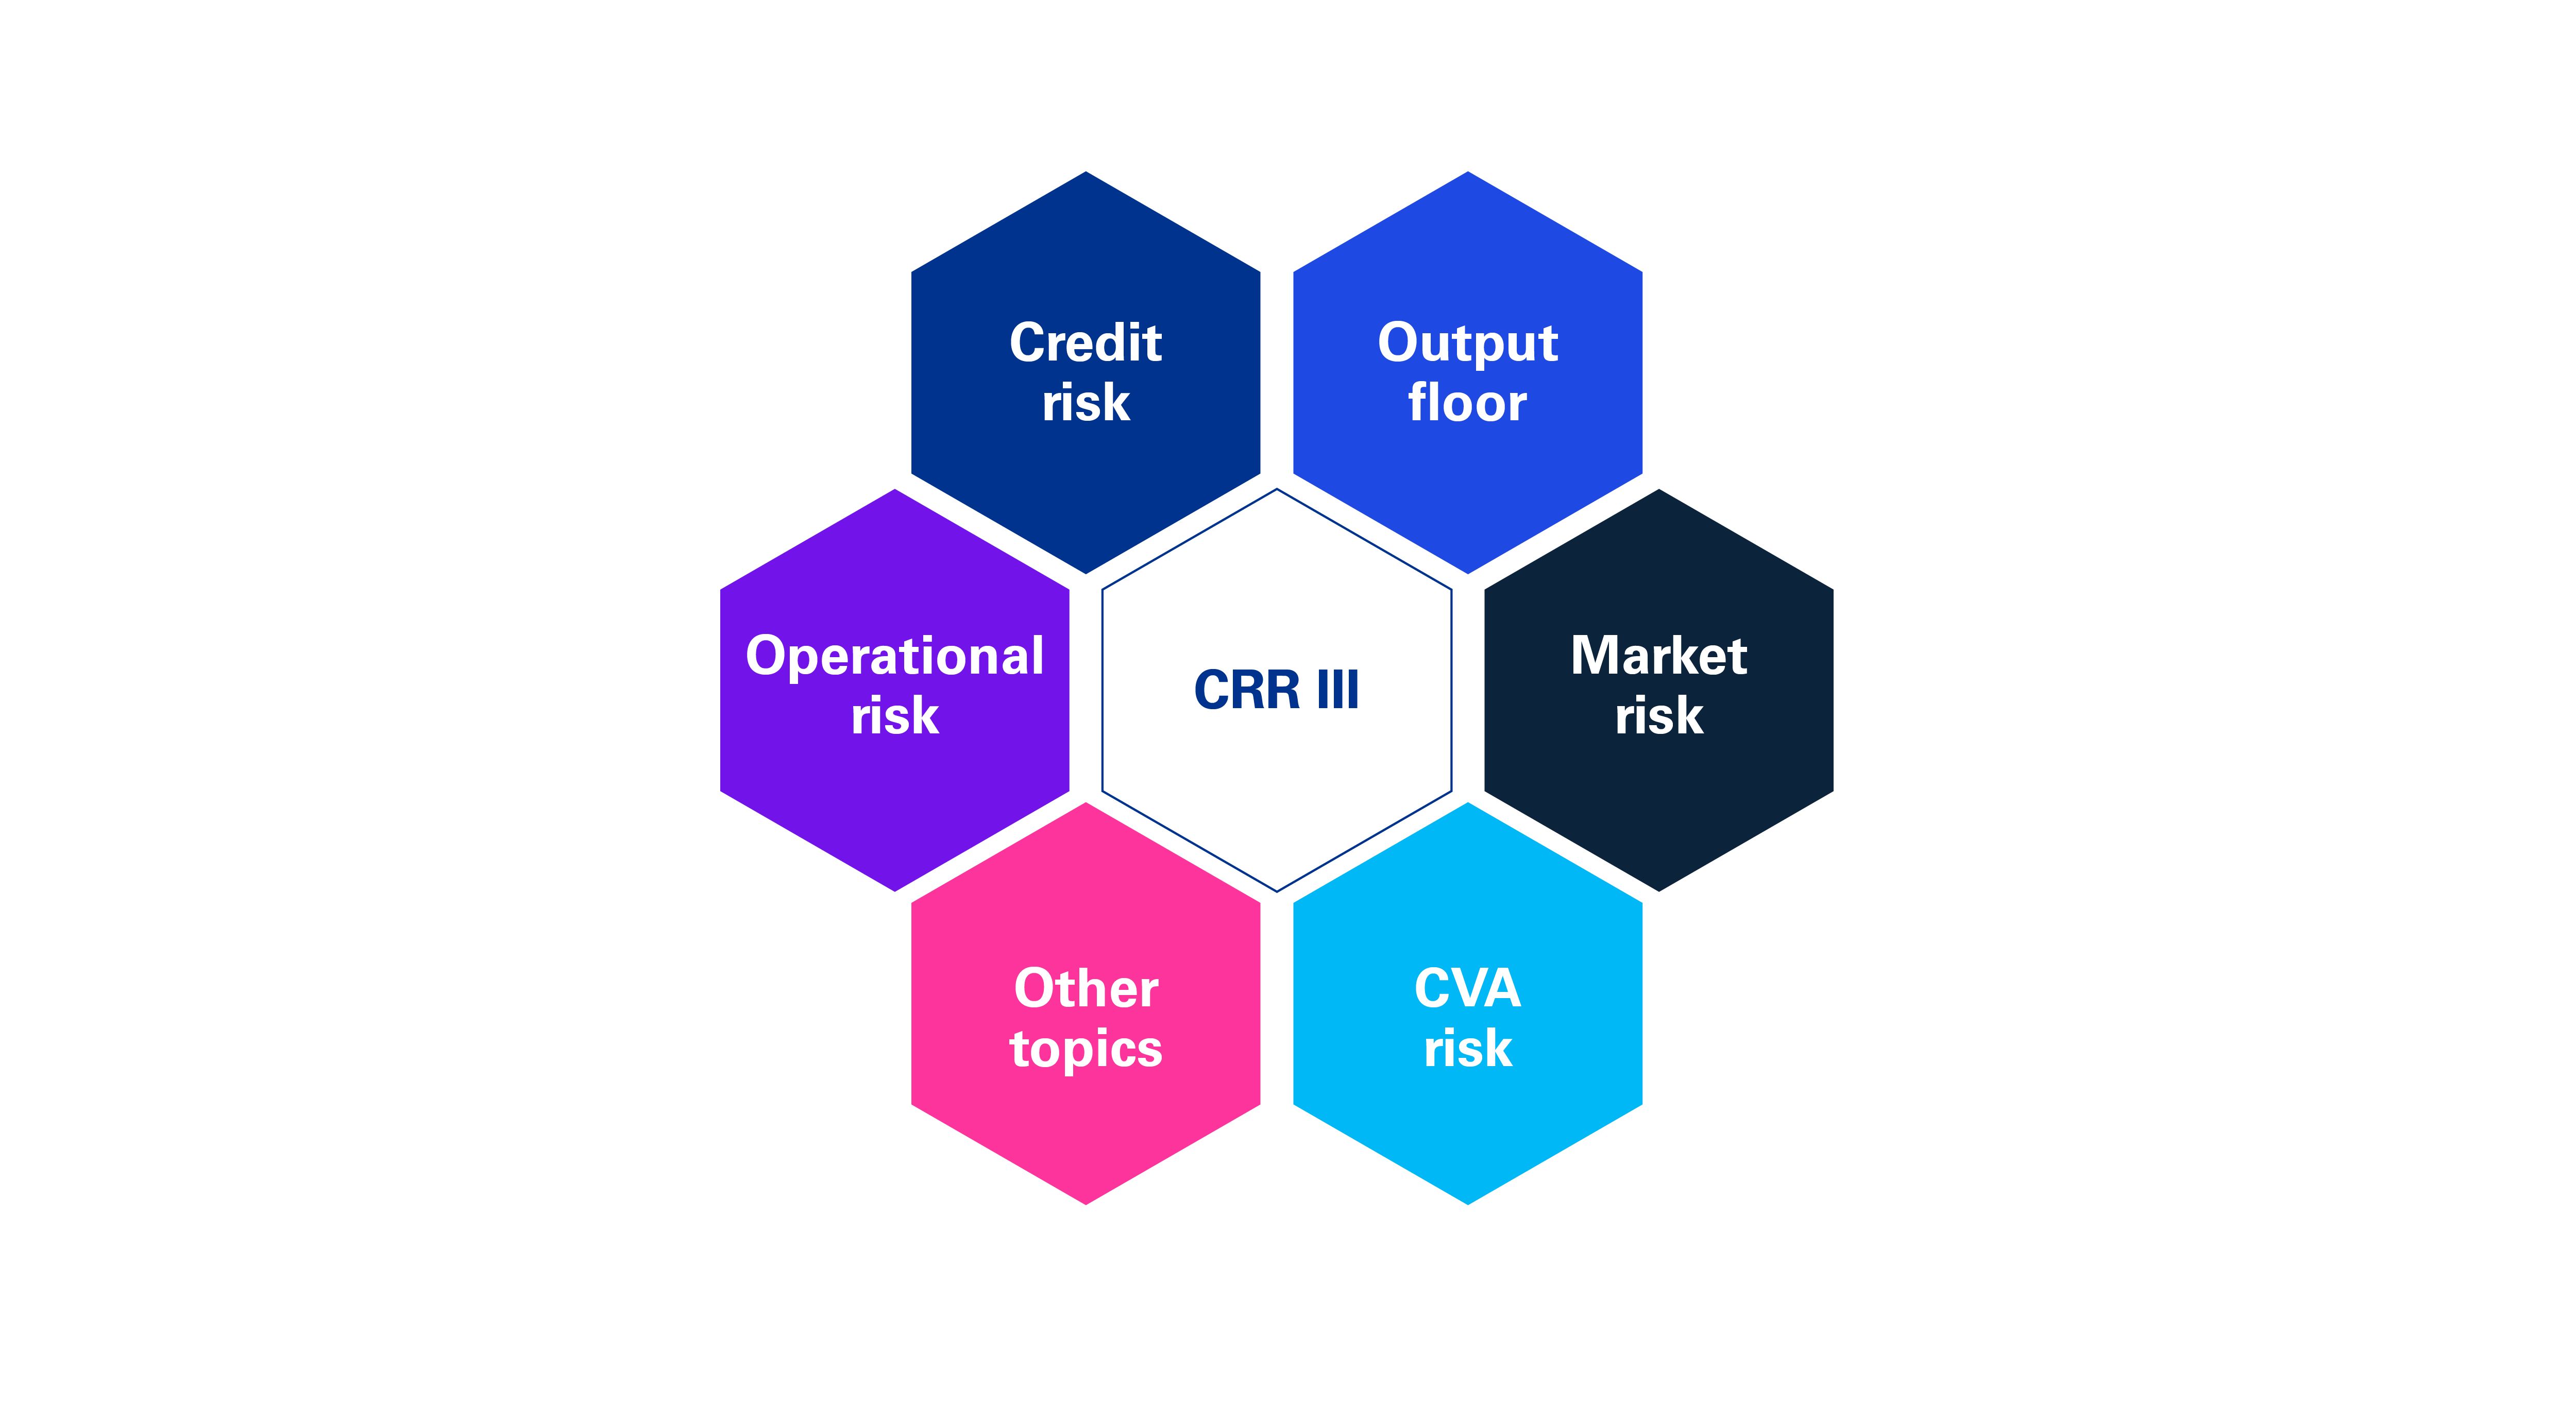 Summary of main changes in CRR III